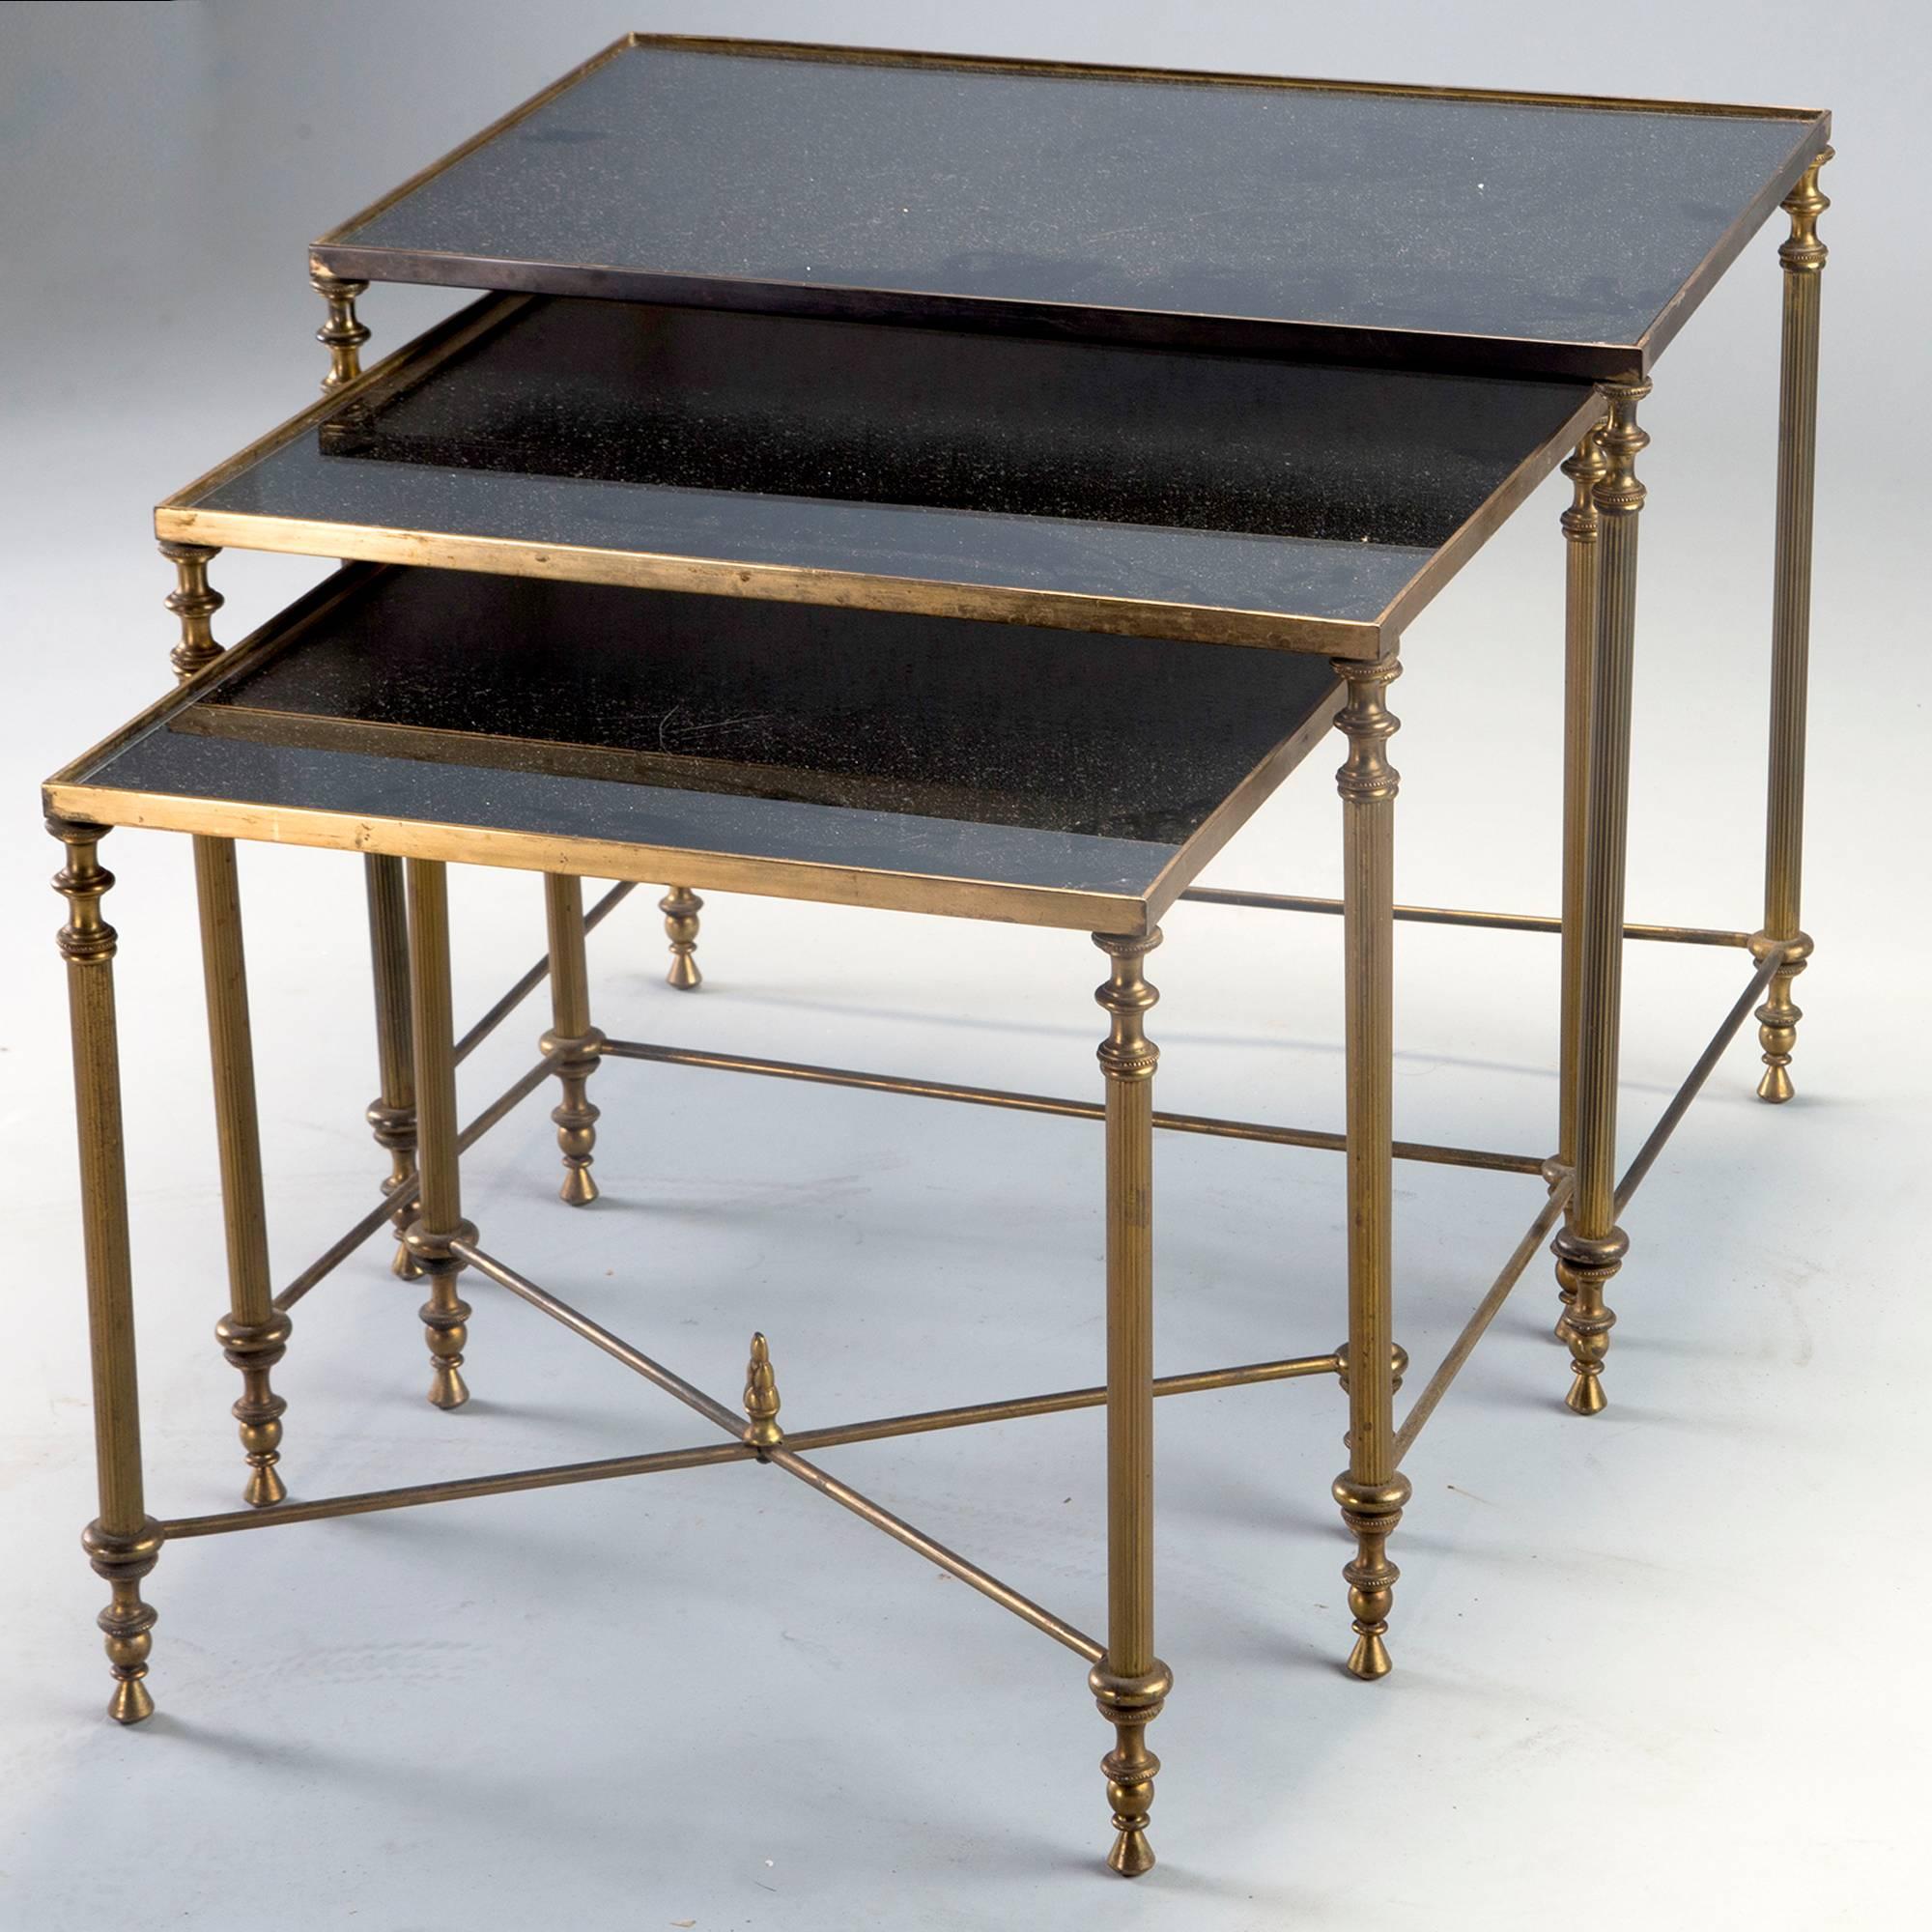 Three circa 1950s nesting tables with brass frames and black mirrored glass tops. Details include reeded legs with tapered feet and a criss cross stretcher with finial detail on smallest table. Measurements shown are for the largest table. Other